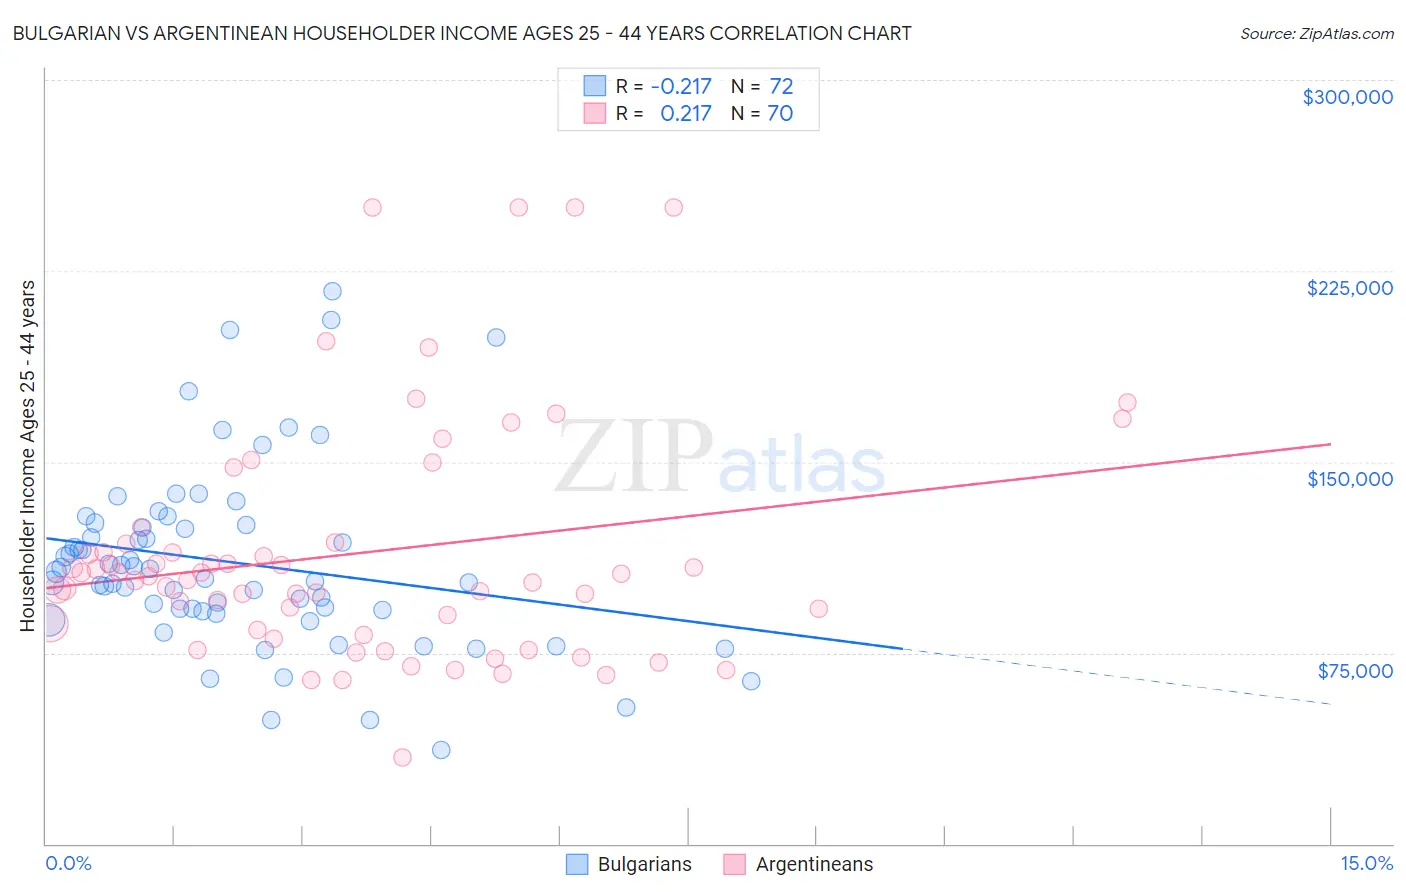 Bulgarian vs Argentinean Householder Income Ages 25 - 44 years